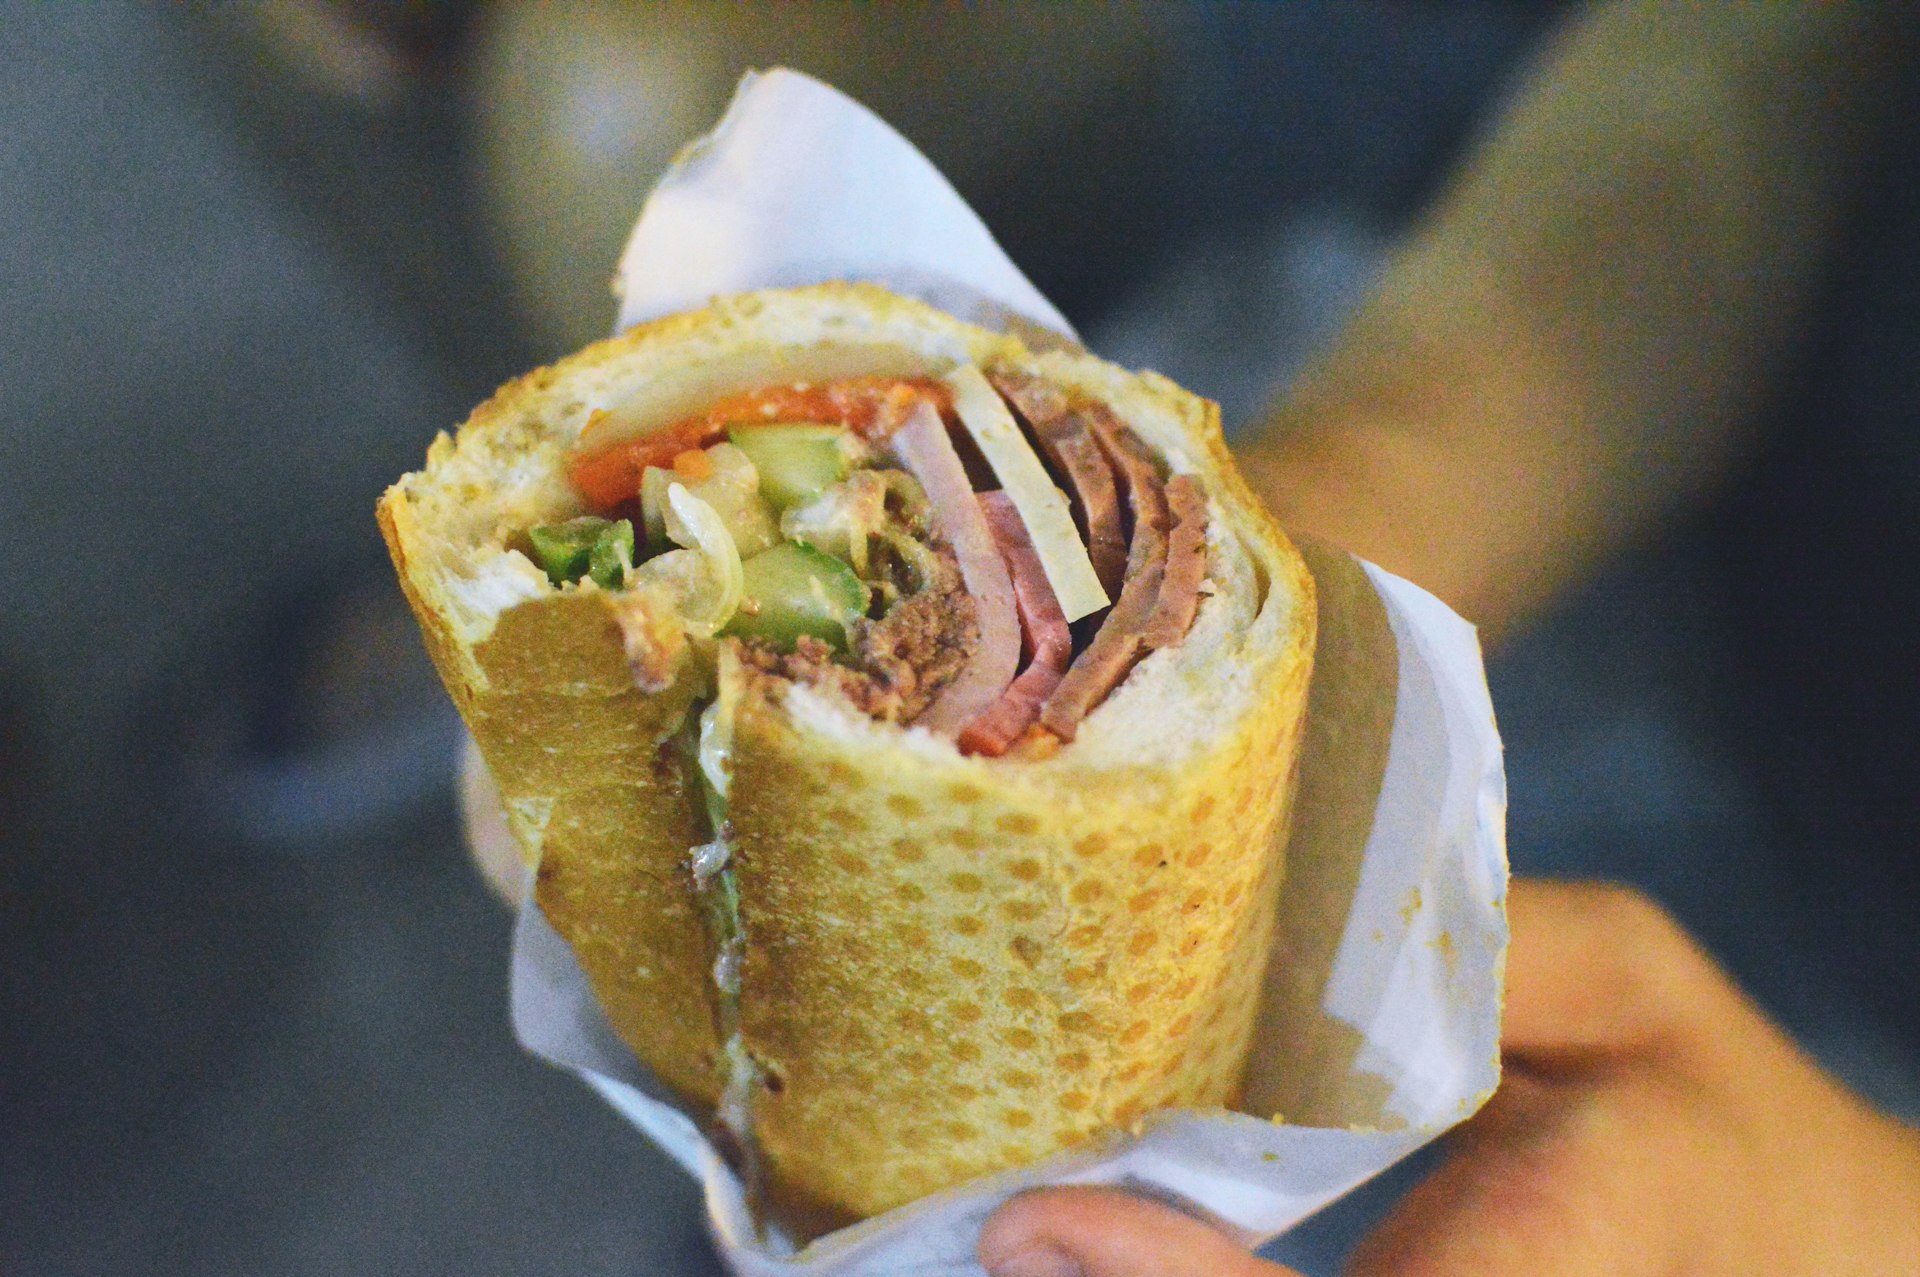 A close-up shot of someone holding a bánh mì roll in Ho Chi Minh City. The roll consists of a small section of baguette, that is stuffed with fillings.